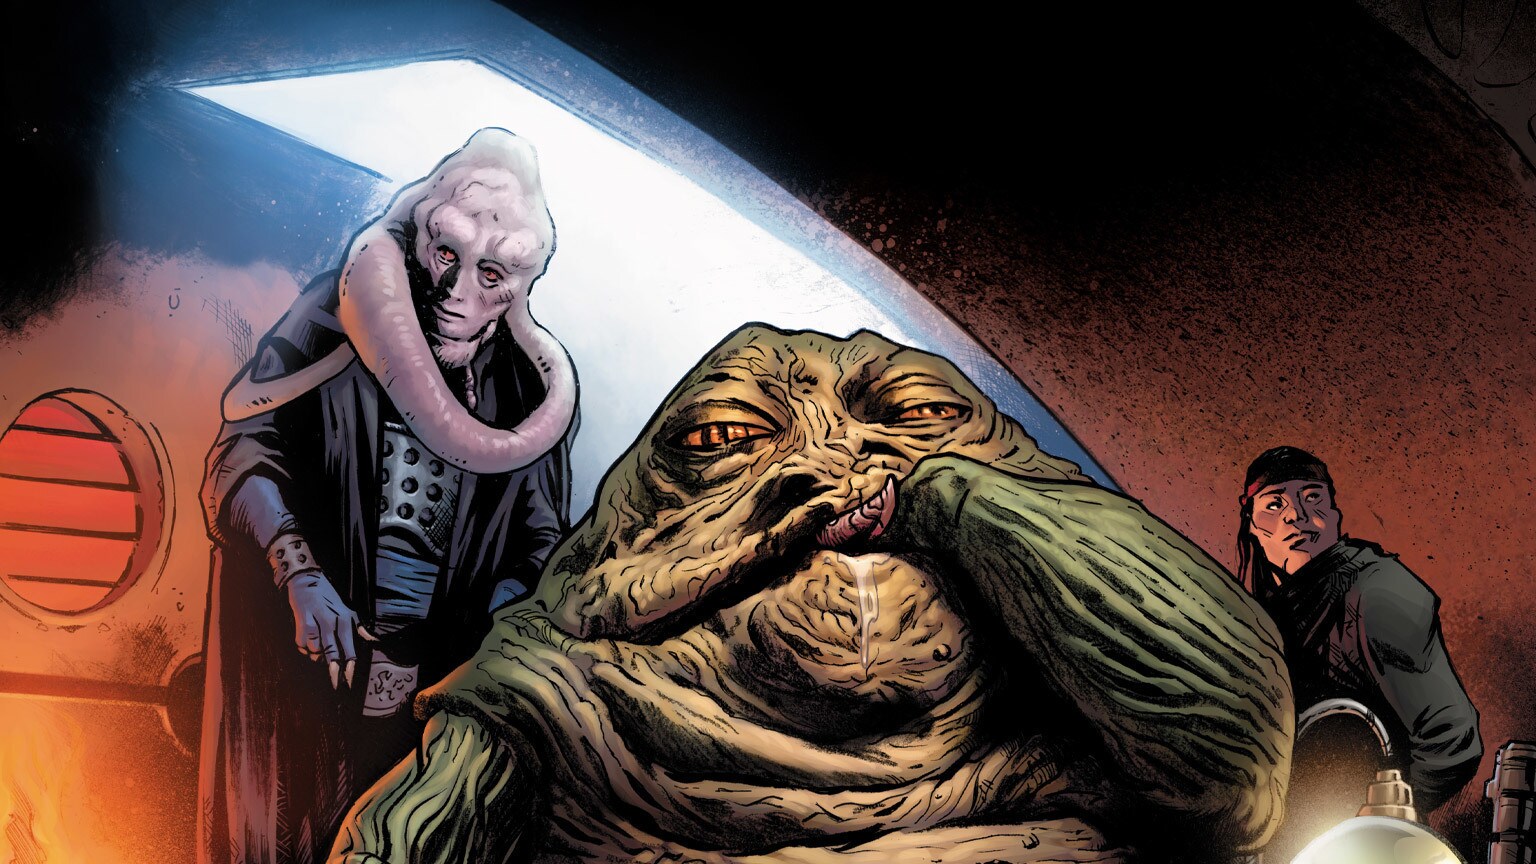 The Illustrious Jabba the Hutt Bids You Welcome to His New Marvel Comic, Jabba’s Palace – Exclusive Reveal